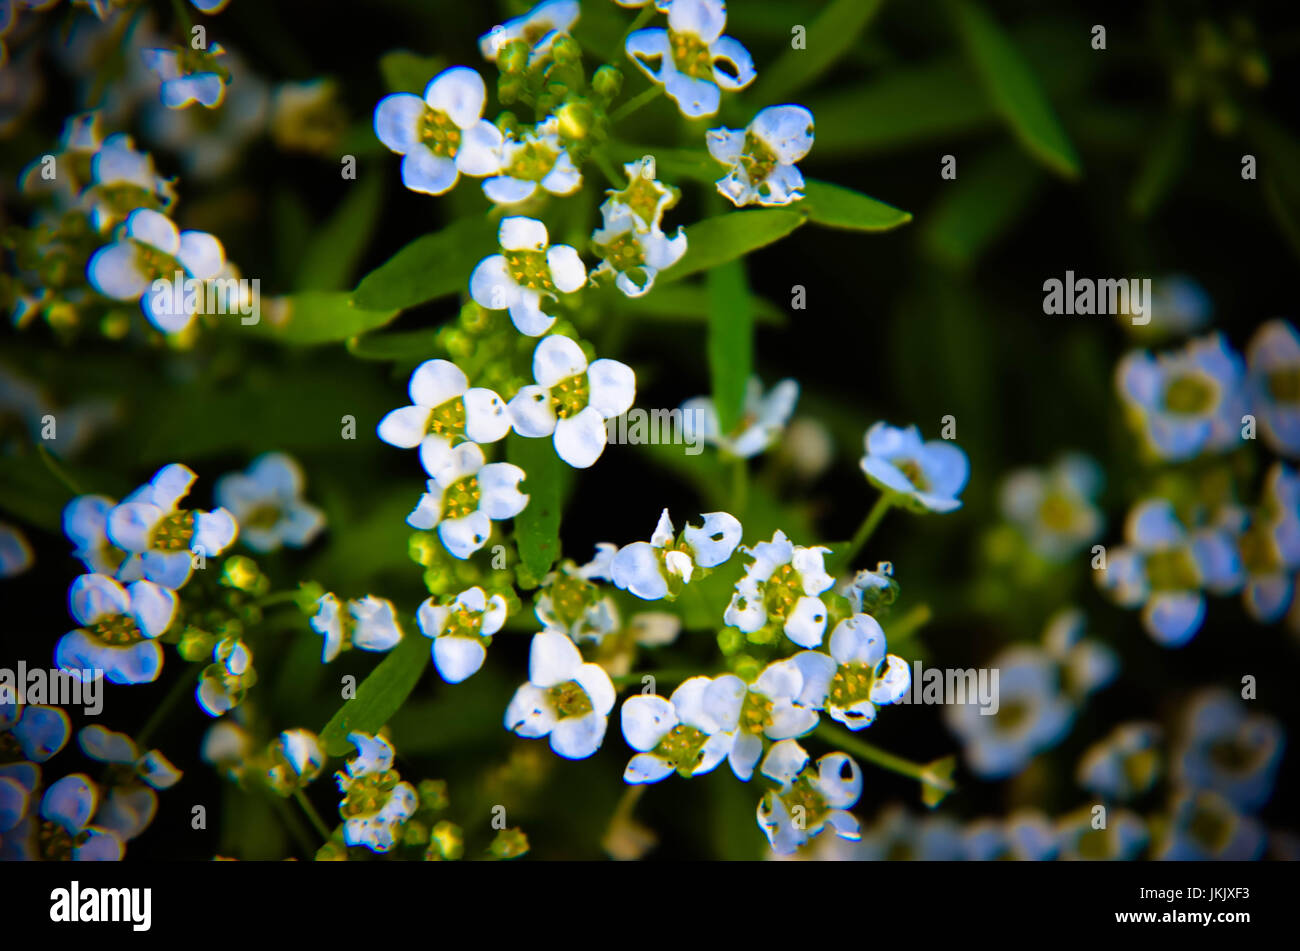 Nature background with little white flowers and sun beams Stock Photo